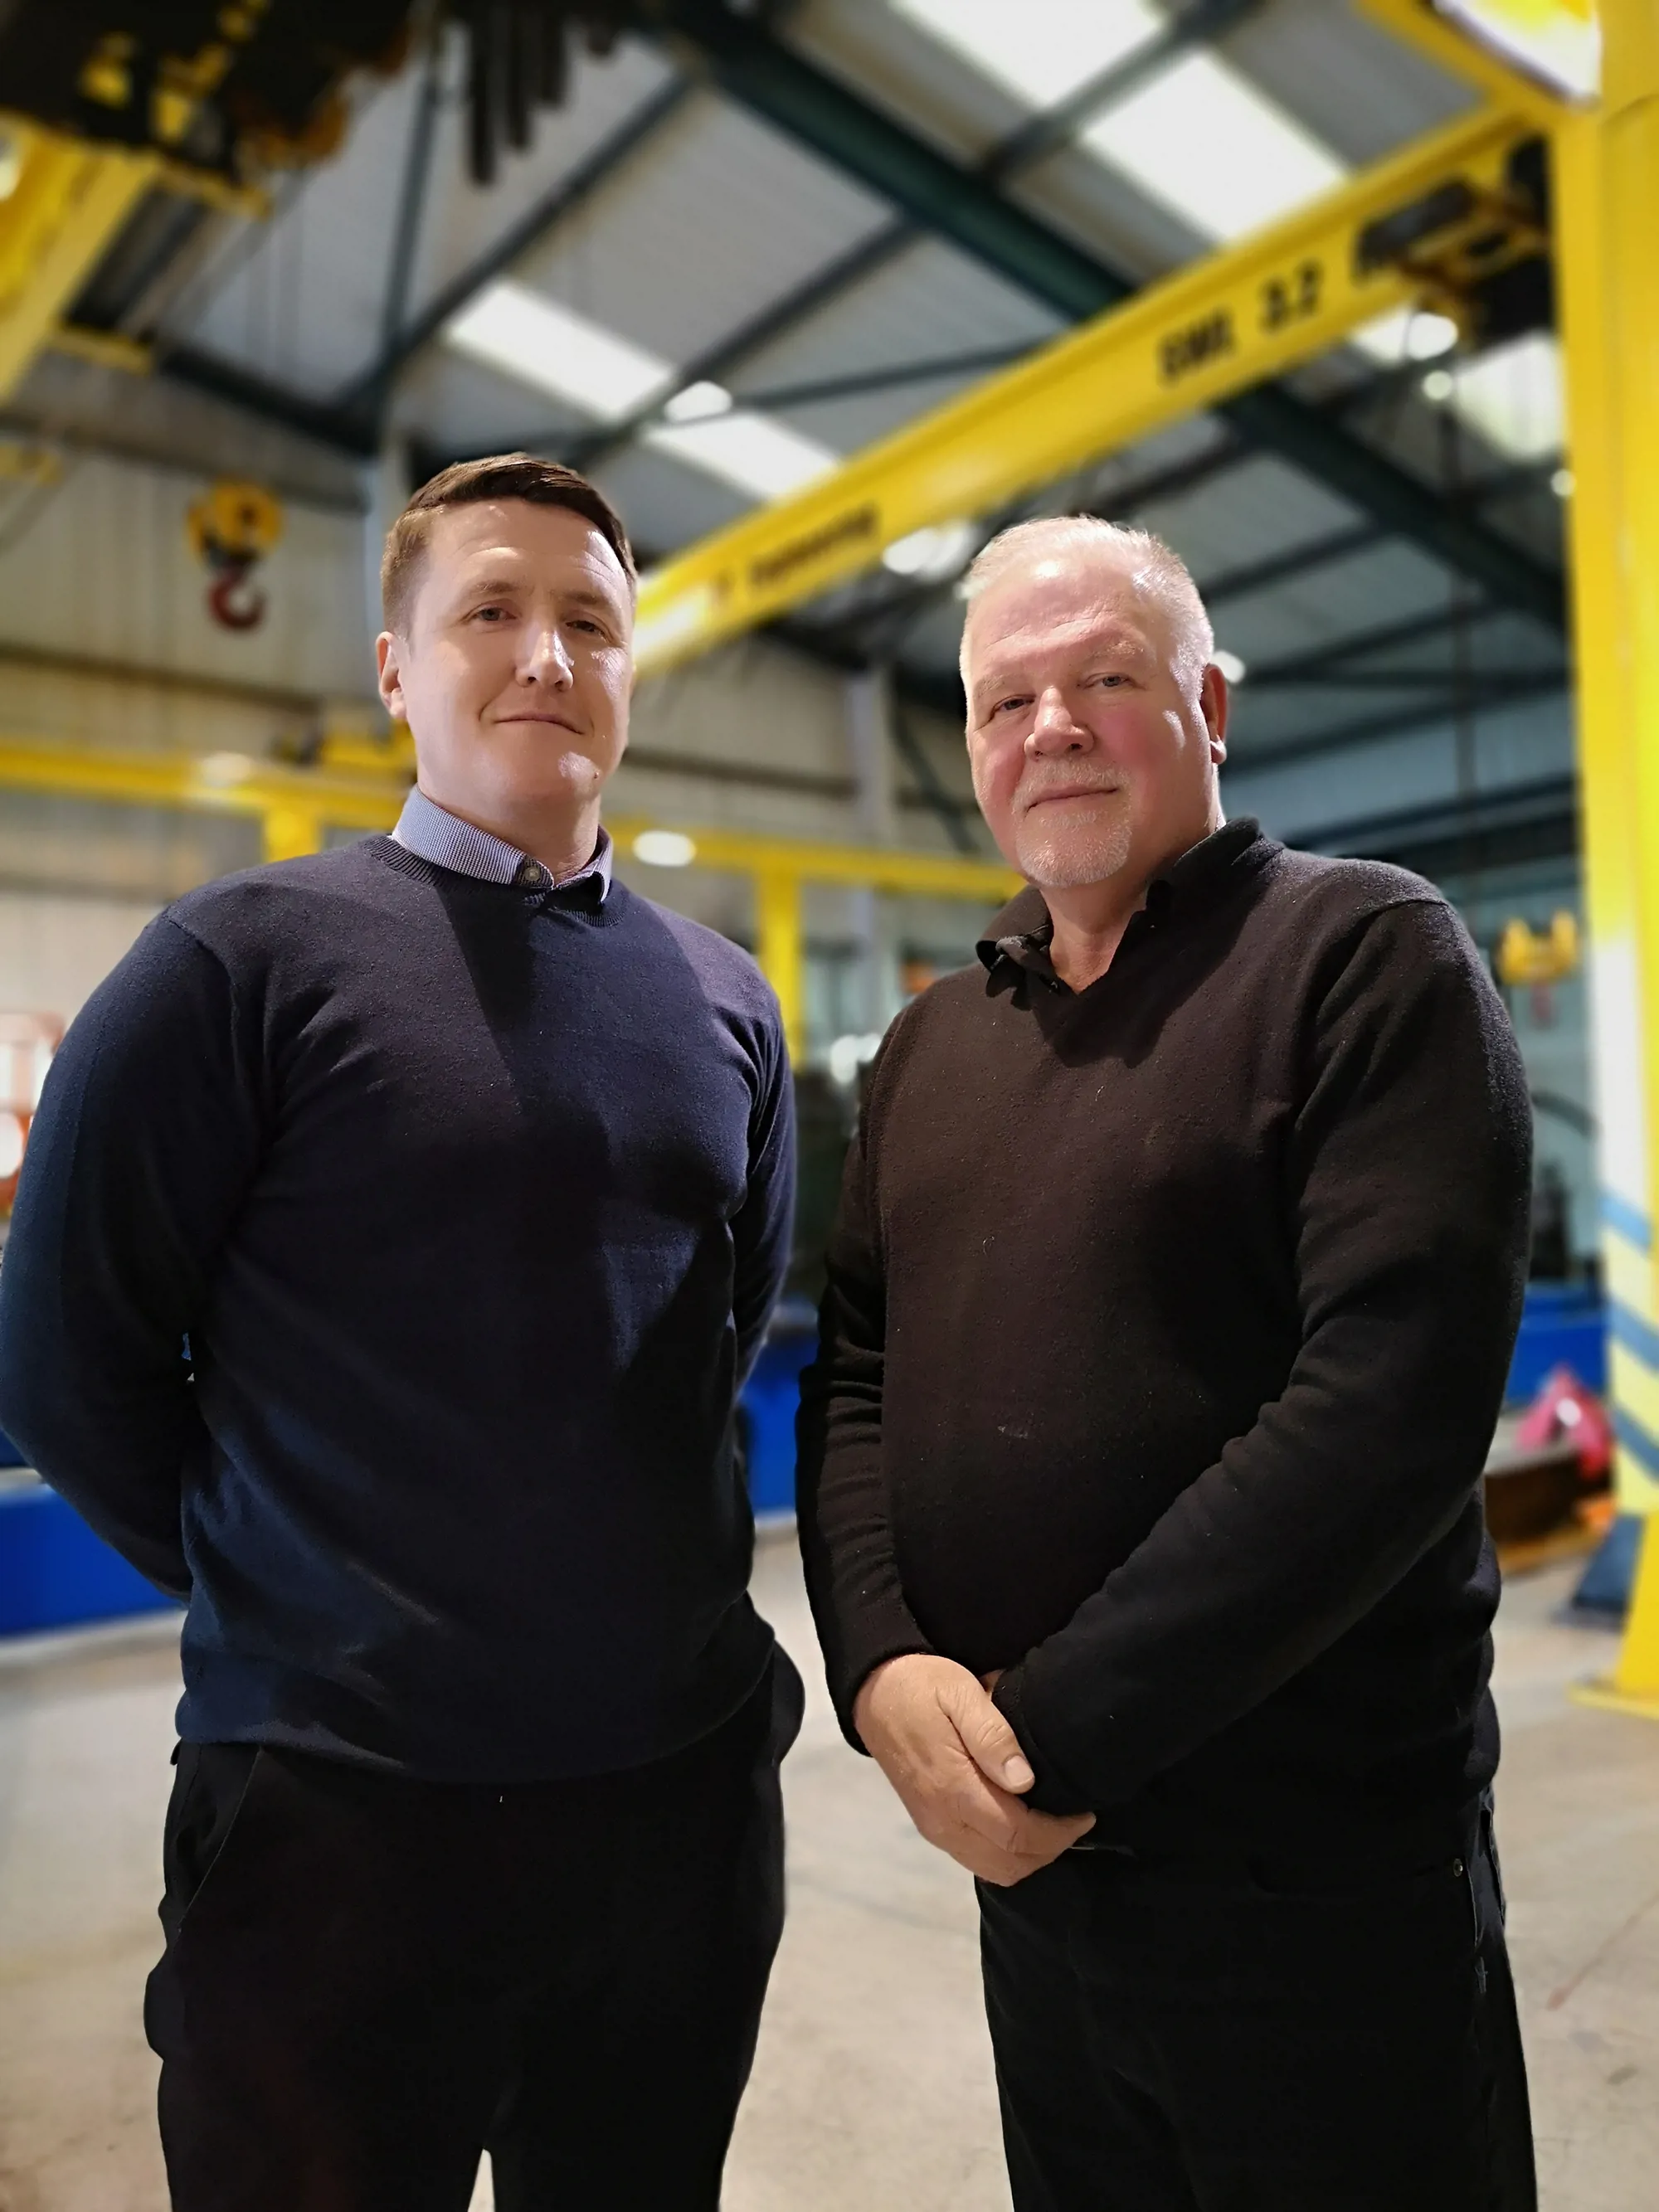 DT Engineering’s Operations Director, Gerry Weston and MD Tom Coyle welcome Made Smarter investment.